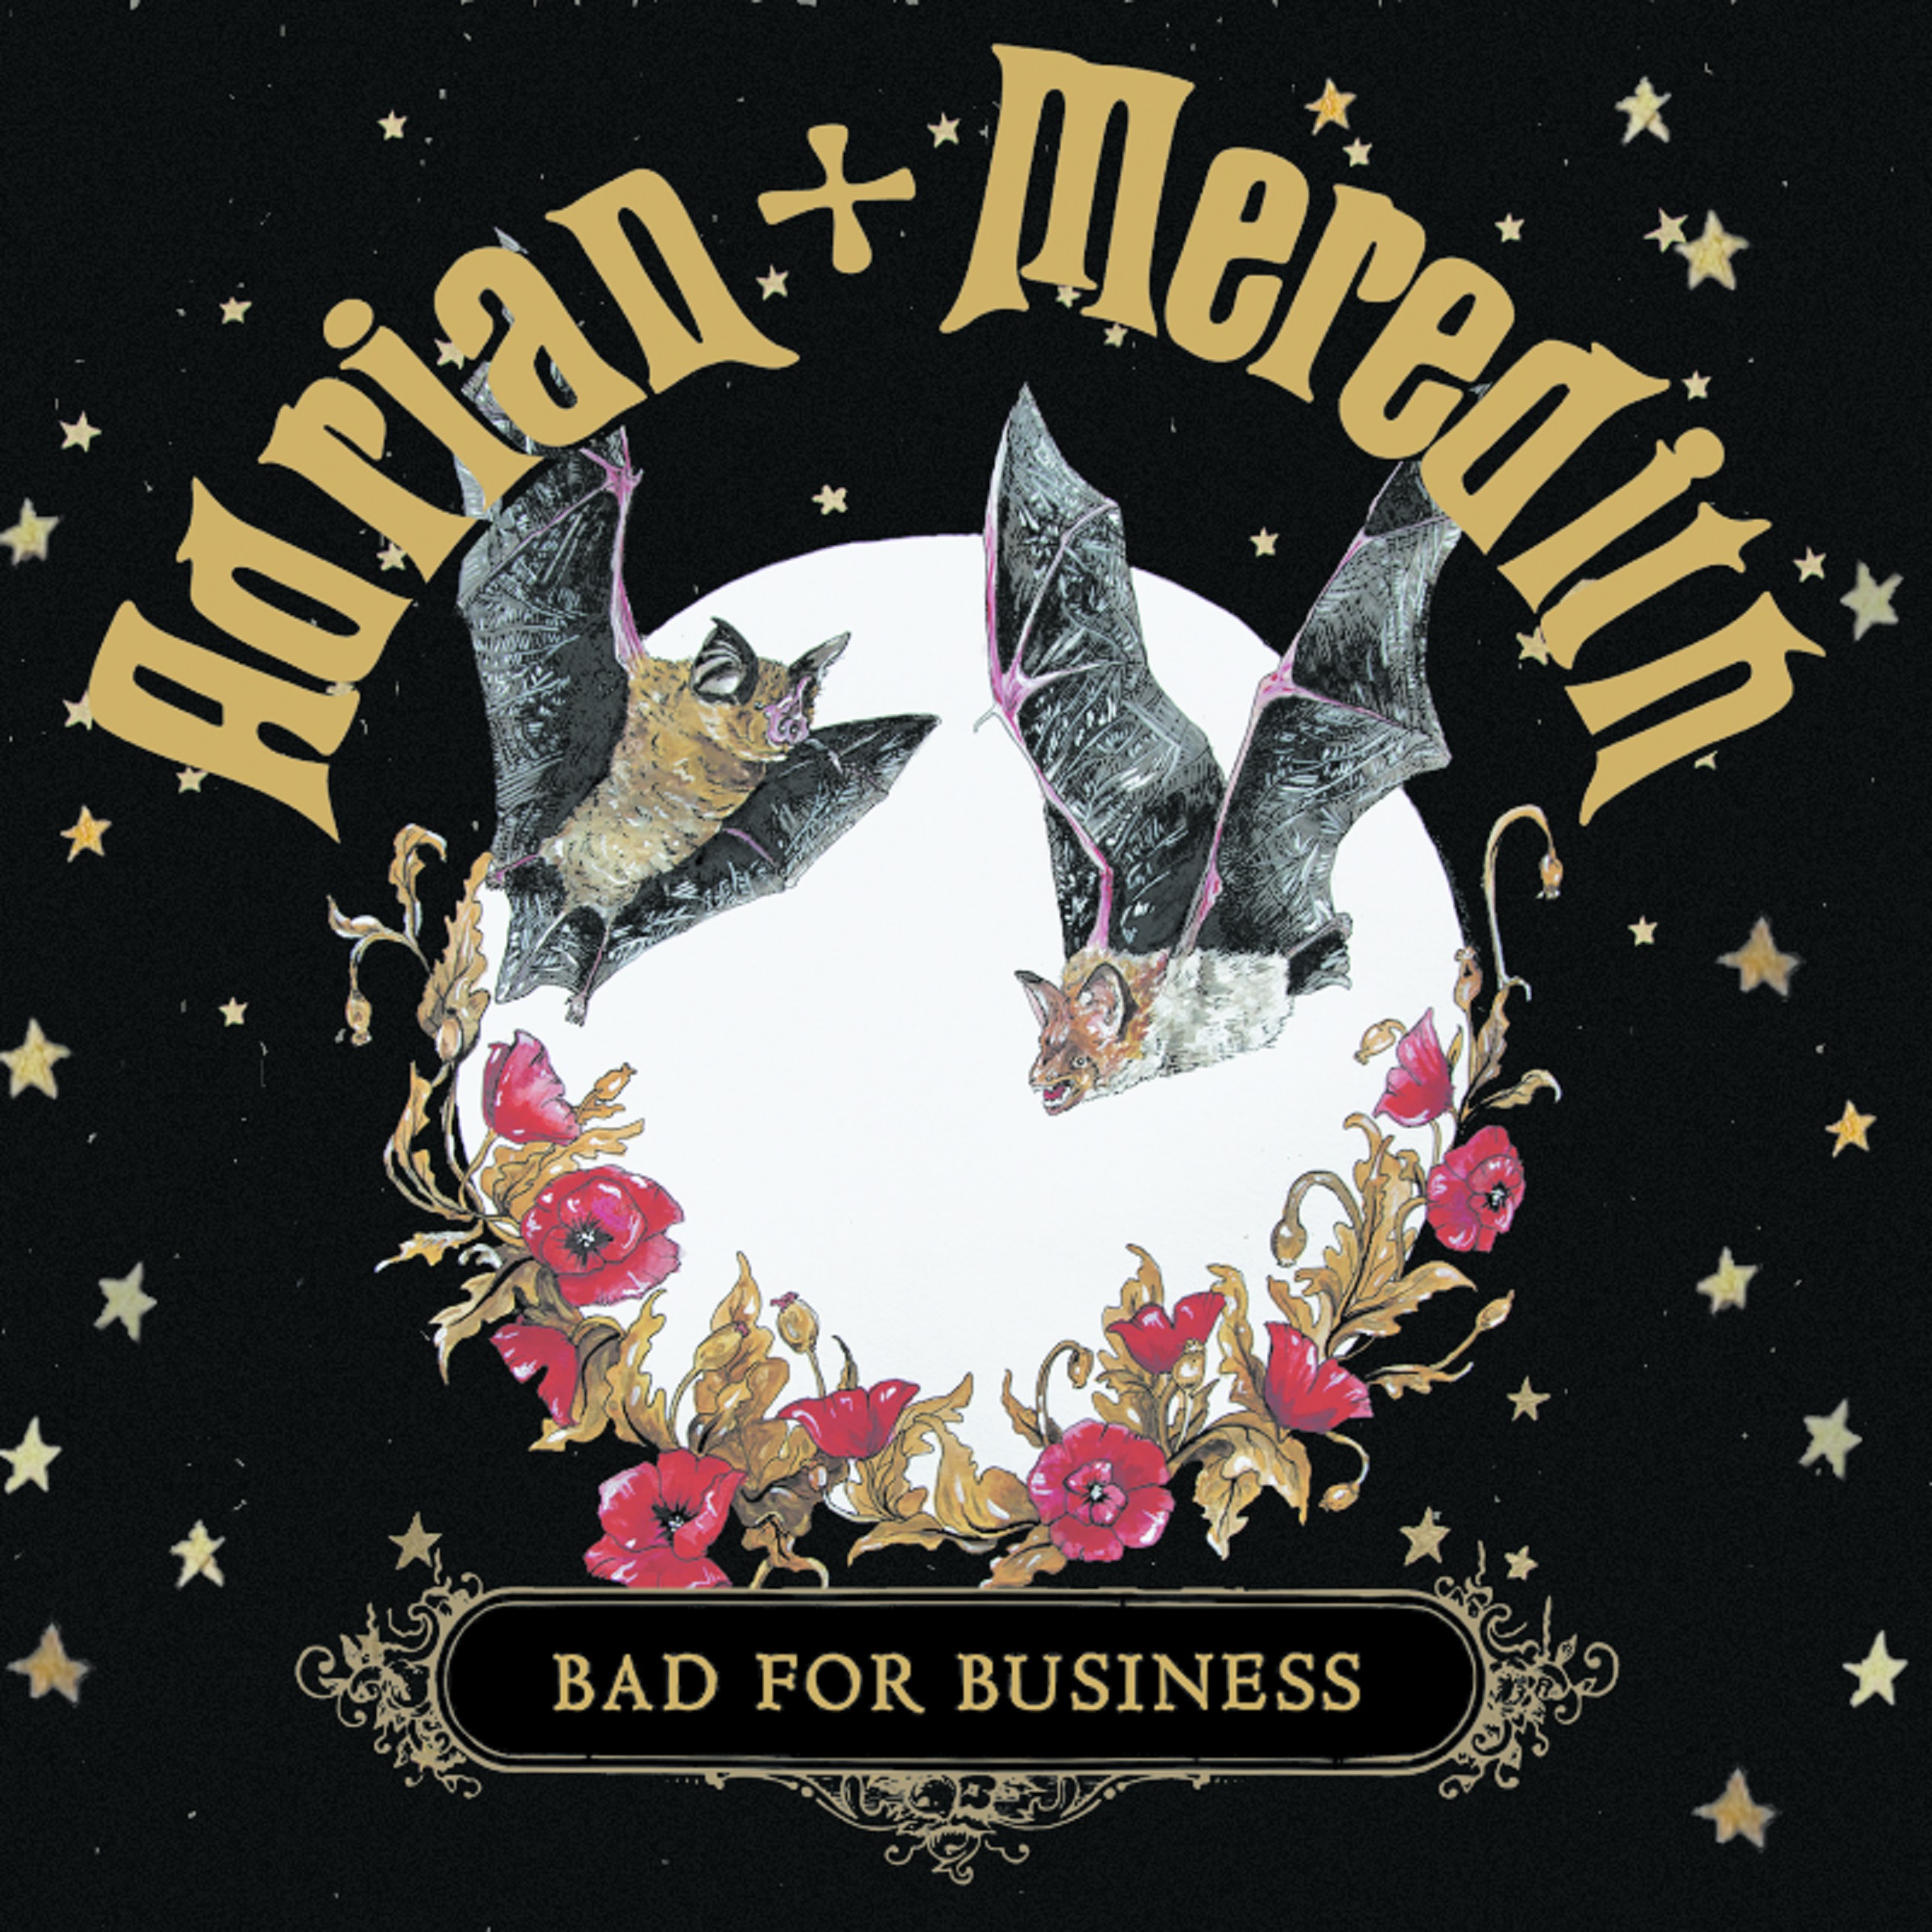 ADRIAN + MEREDITH ANNOUNCE NEW ALBUM, BAD FOR BUSINESS, DUE AUGUST 20